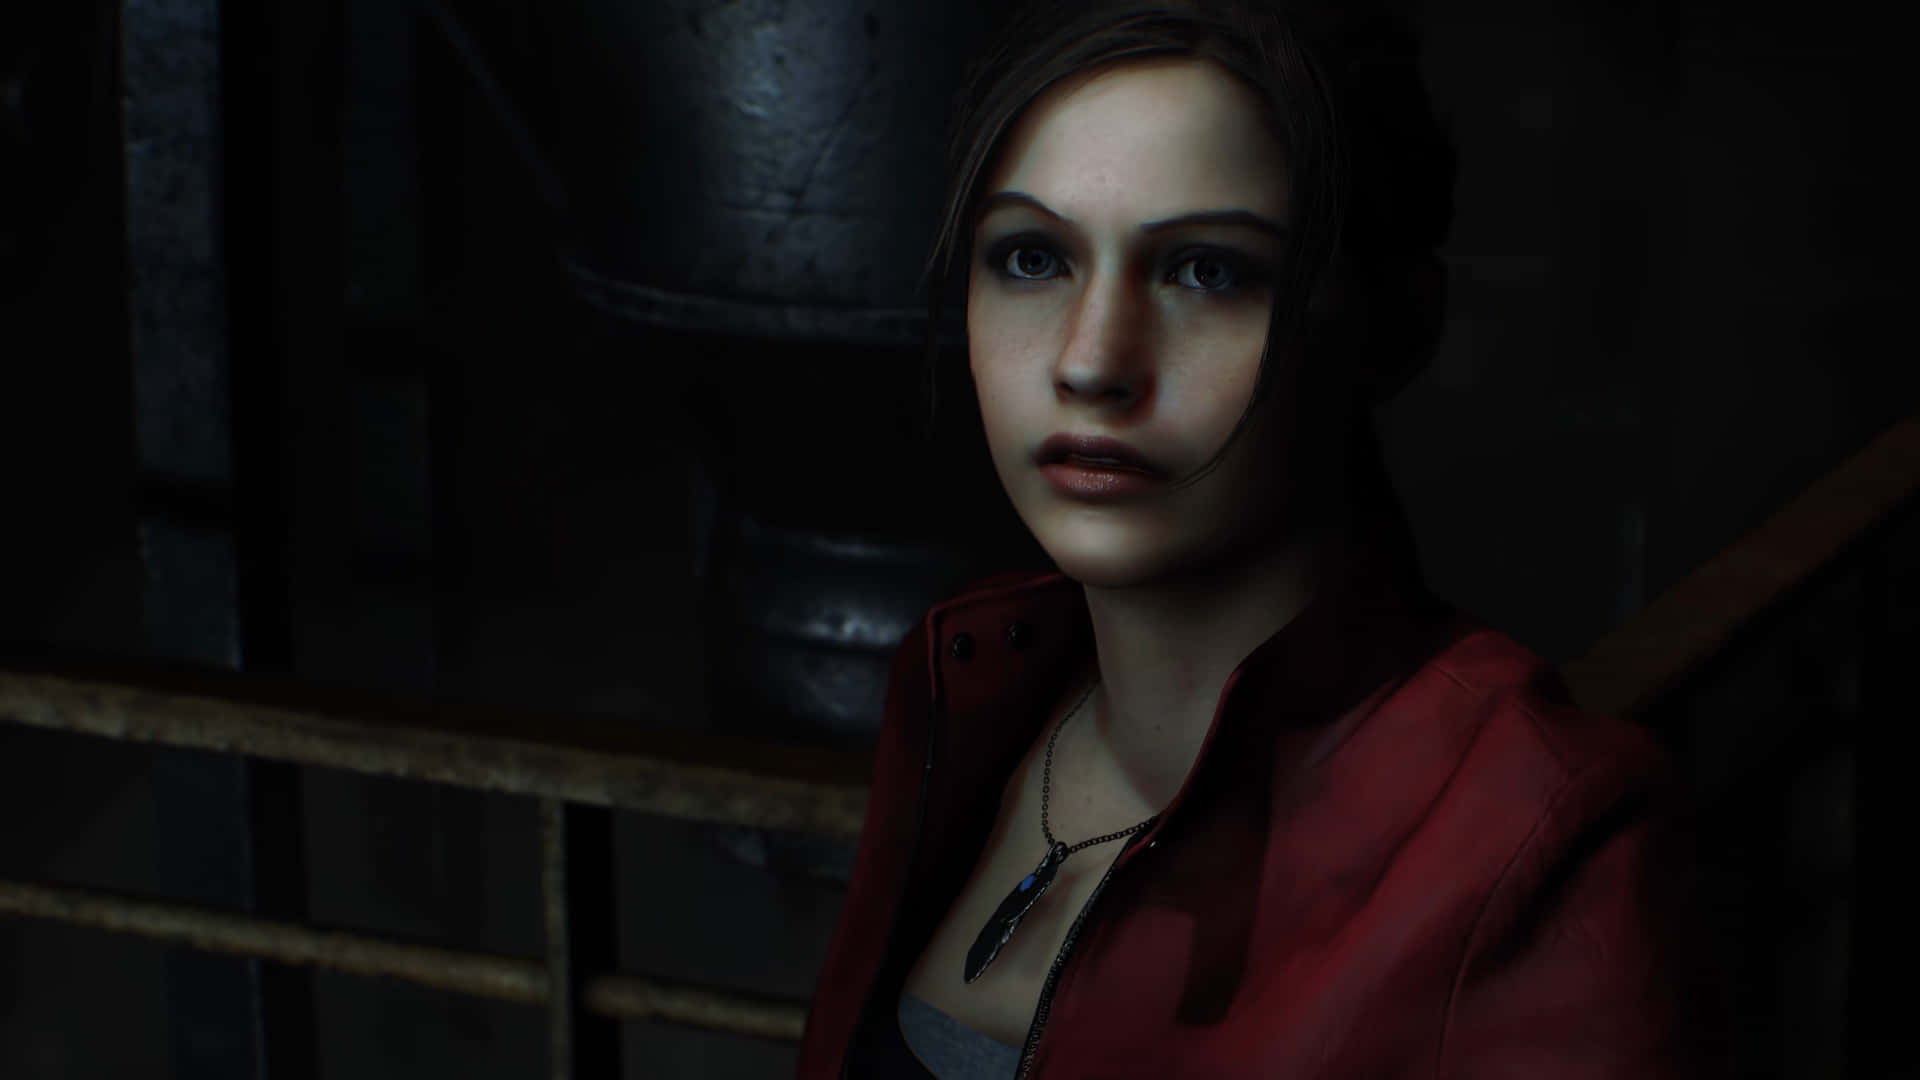 Claire Redfield is ready for action in Resident Evil 2 Wallpaper